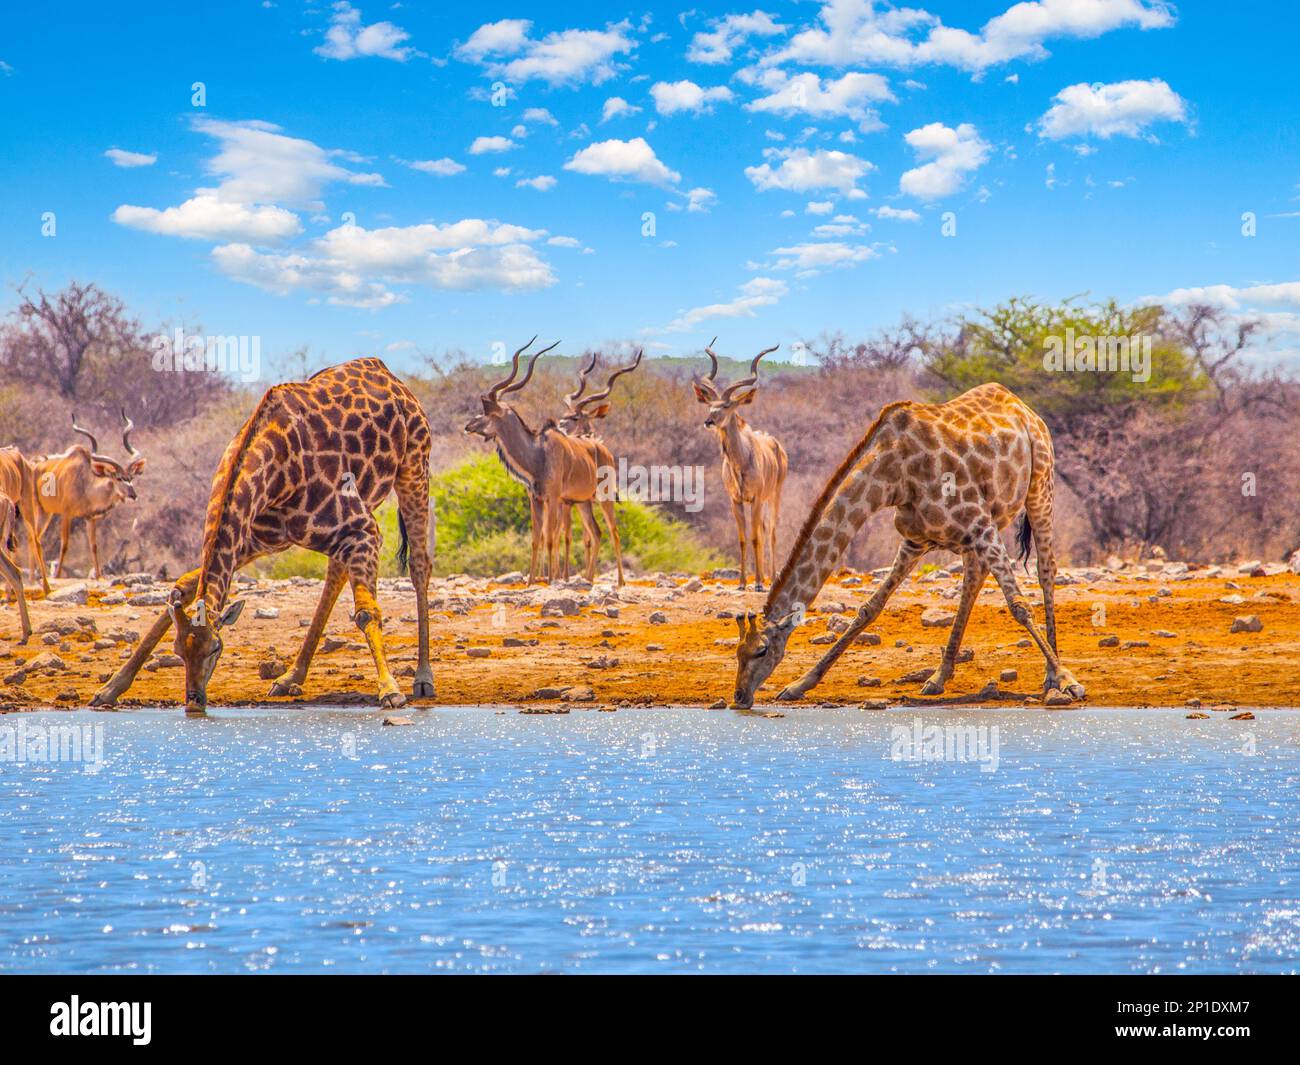 Two giraffes drinking water from waterhole. With bent long neck and outstretched legs. Dry savanna of Etosha National Park, Namibia Stock Photo